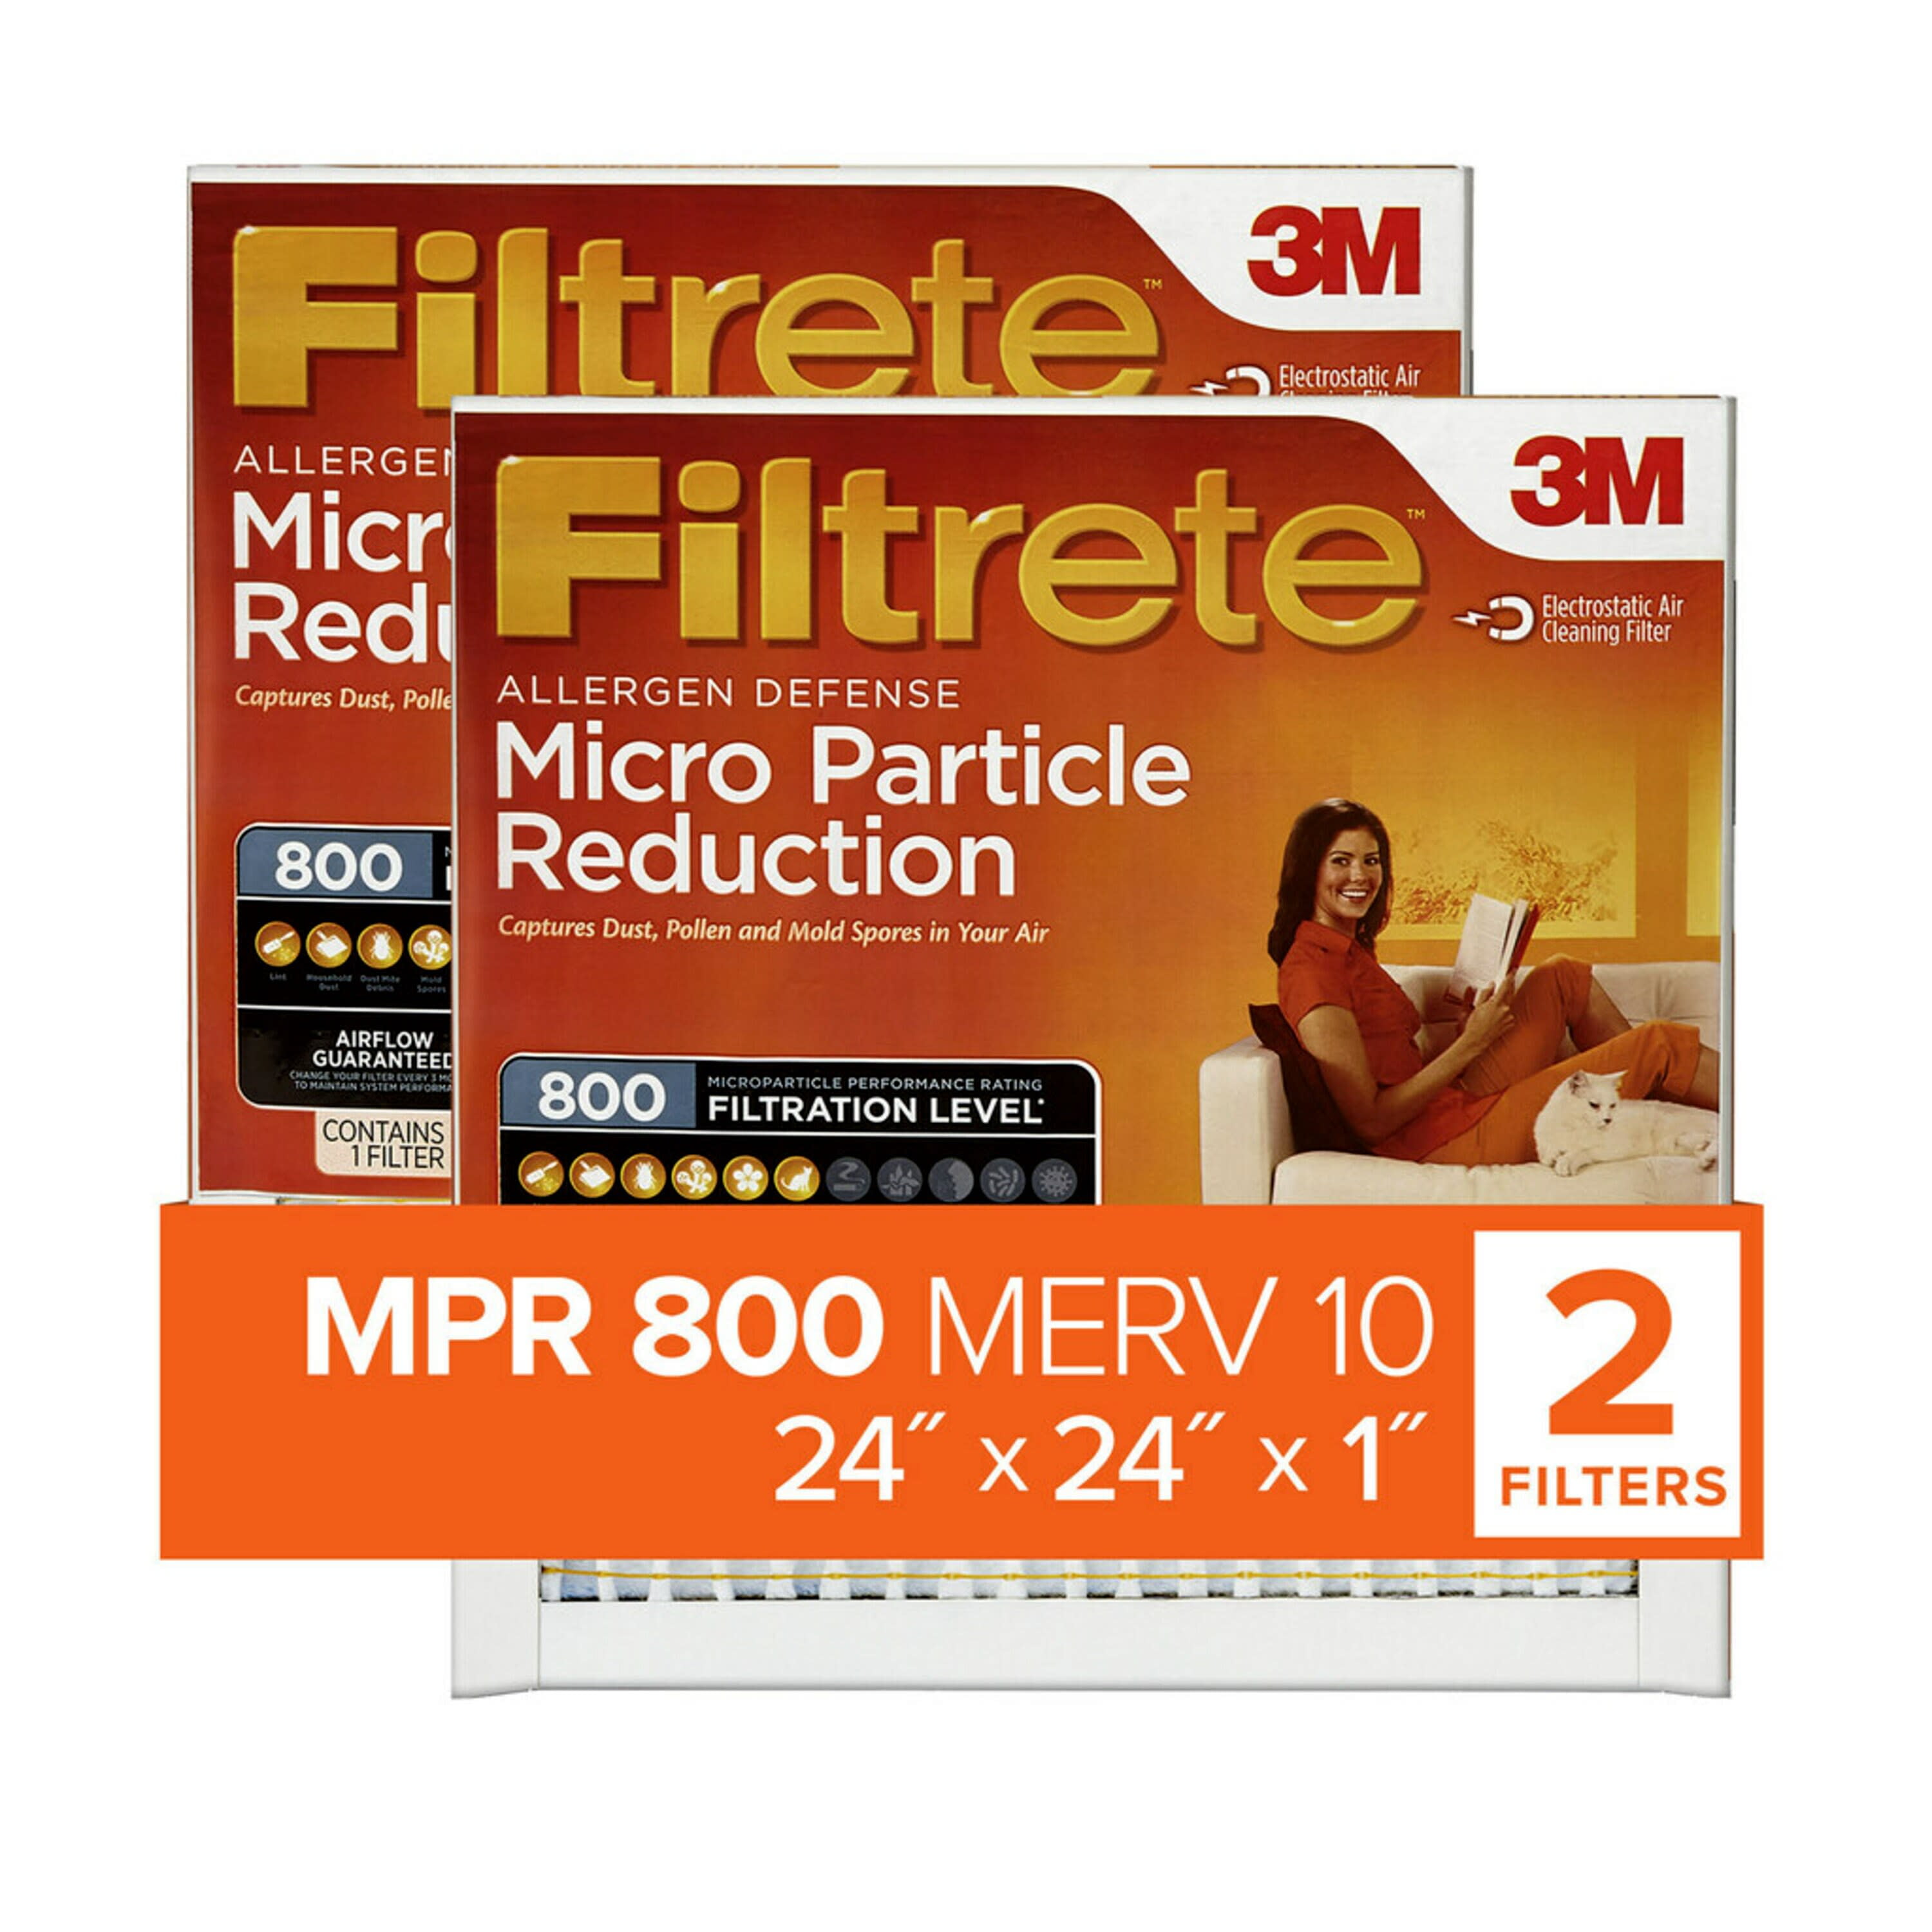 Filtrete Allergen Reduction Deep Pleat SIZES LOTS Furnace Air Filter SHIPS FREE 